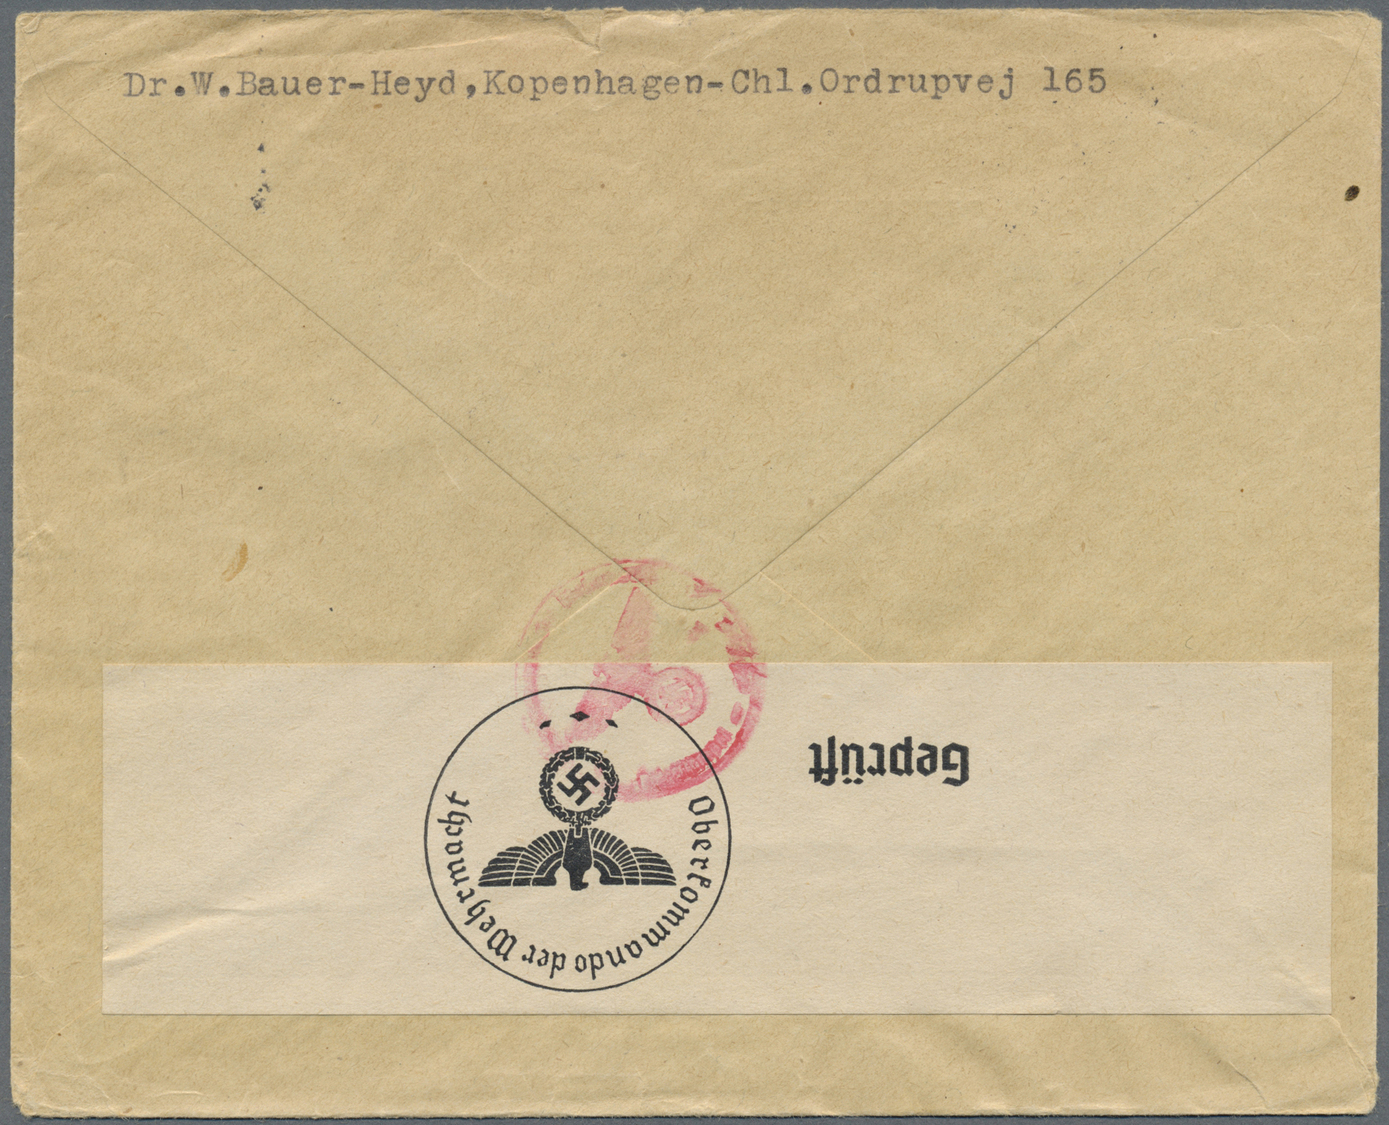 Br Dänemark: 1934, 6 airmail covers mostly from Copenhagen to France, Switzerland, CSR